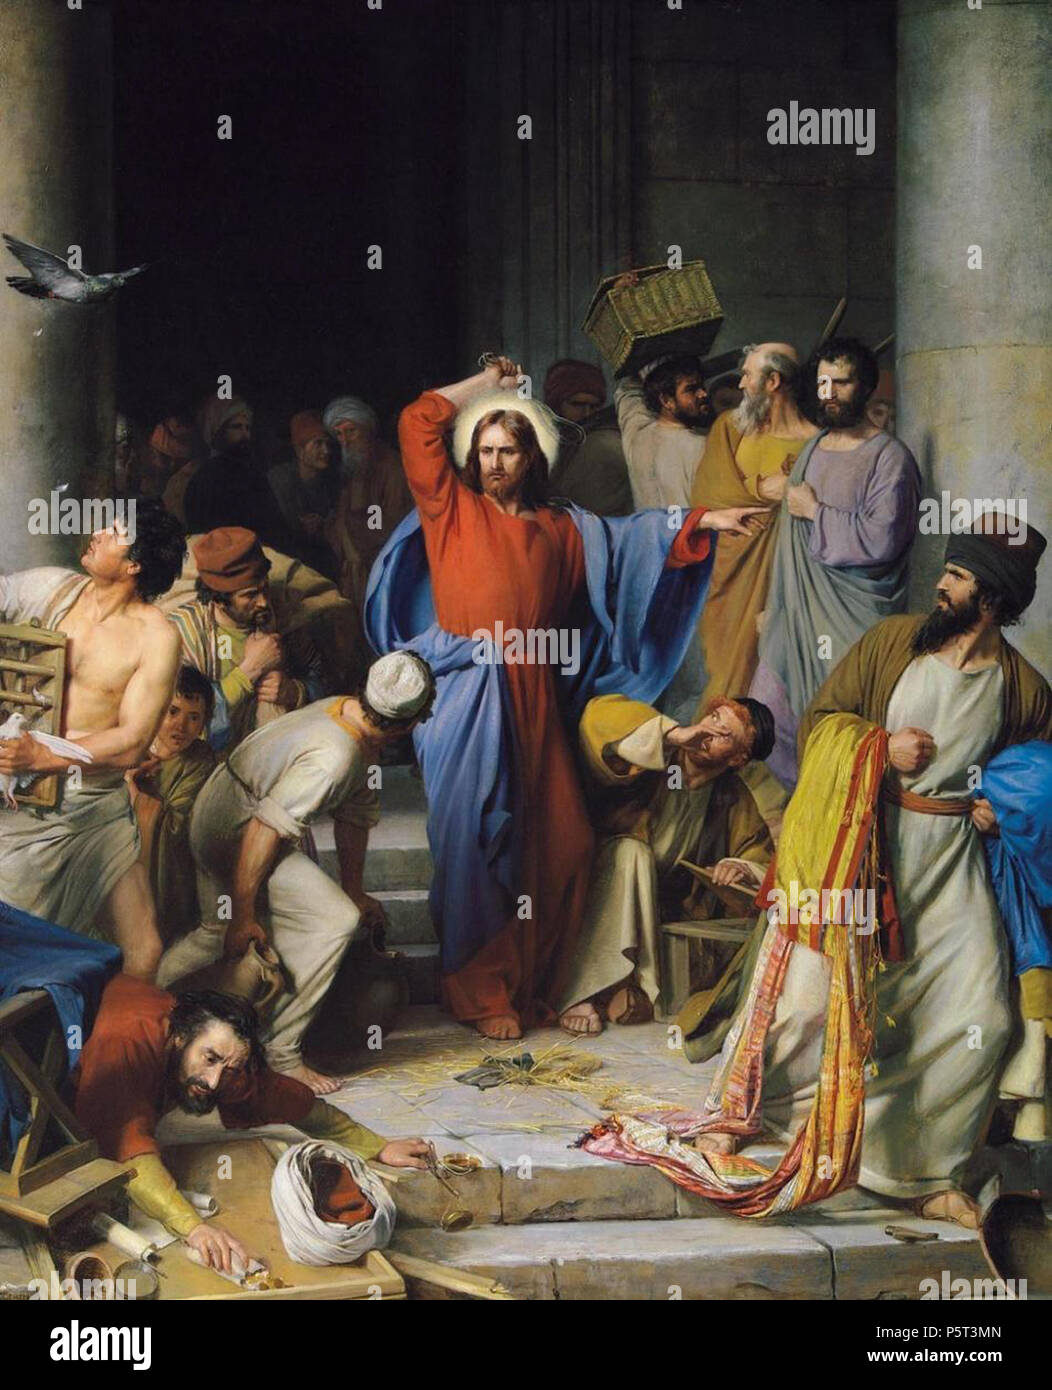 N/A. English: Jesus casting out the money changers at the temple . 1800s.   Carl Bloch  (1834–1890)     Alternative names Carl Heinrich Bloch  Description Danish painter  Date of birth/death 23 May 1834 22 February 1890  Location of birth/death Copenhagen, Denmark Copenhagen  Work location Copenhagen  Authority control  : Q547055 VIAF:54420290 ISNI:0000 0001 0800 387X ULAN:500050679 LCCN:nr2002025701 Open Library:OL5067552A WorldCat 281 CastingoutMoneyChangers Stock Photo